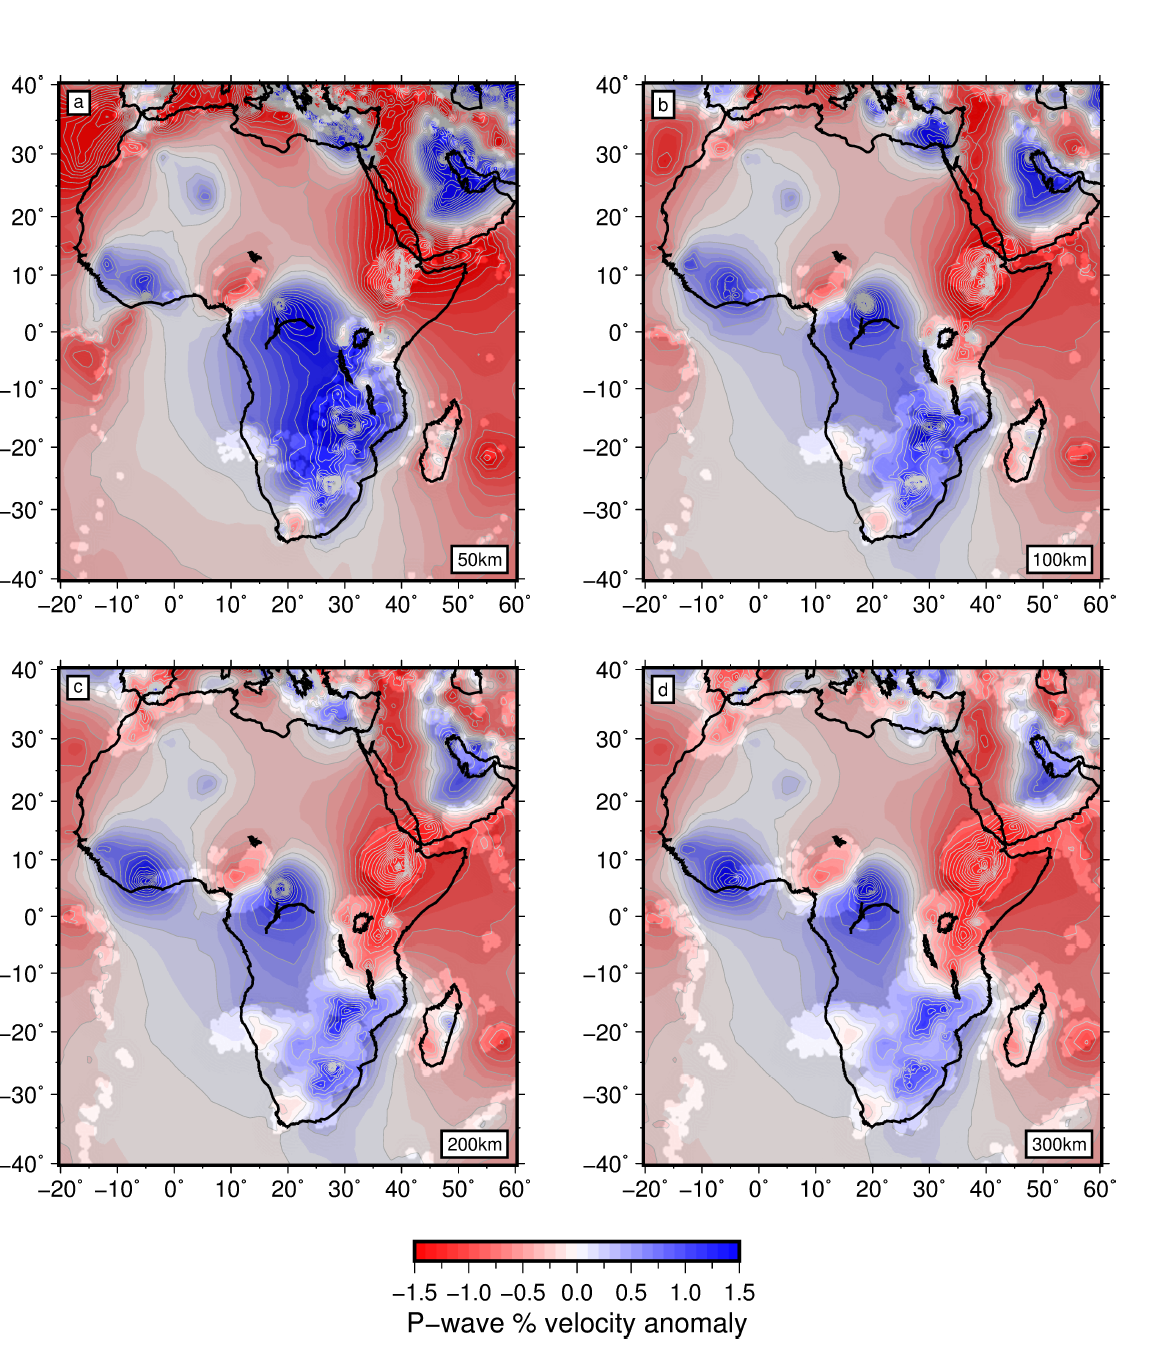 AFRP20 African tomographic model